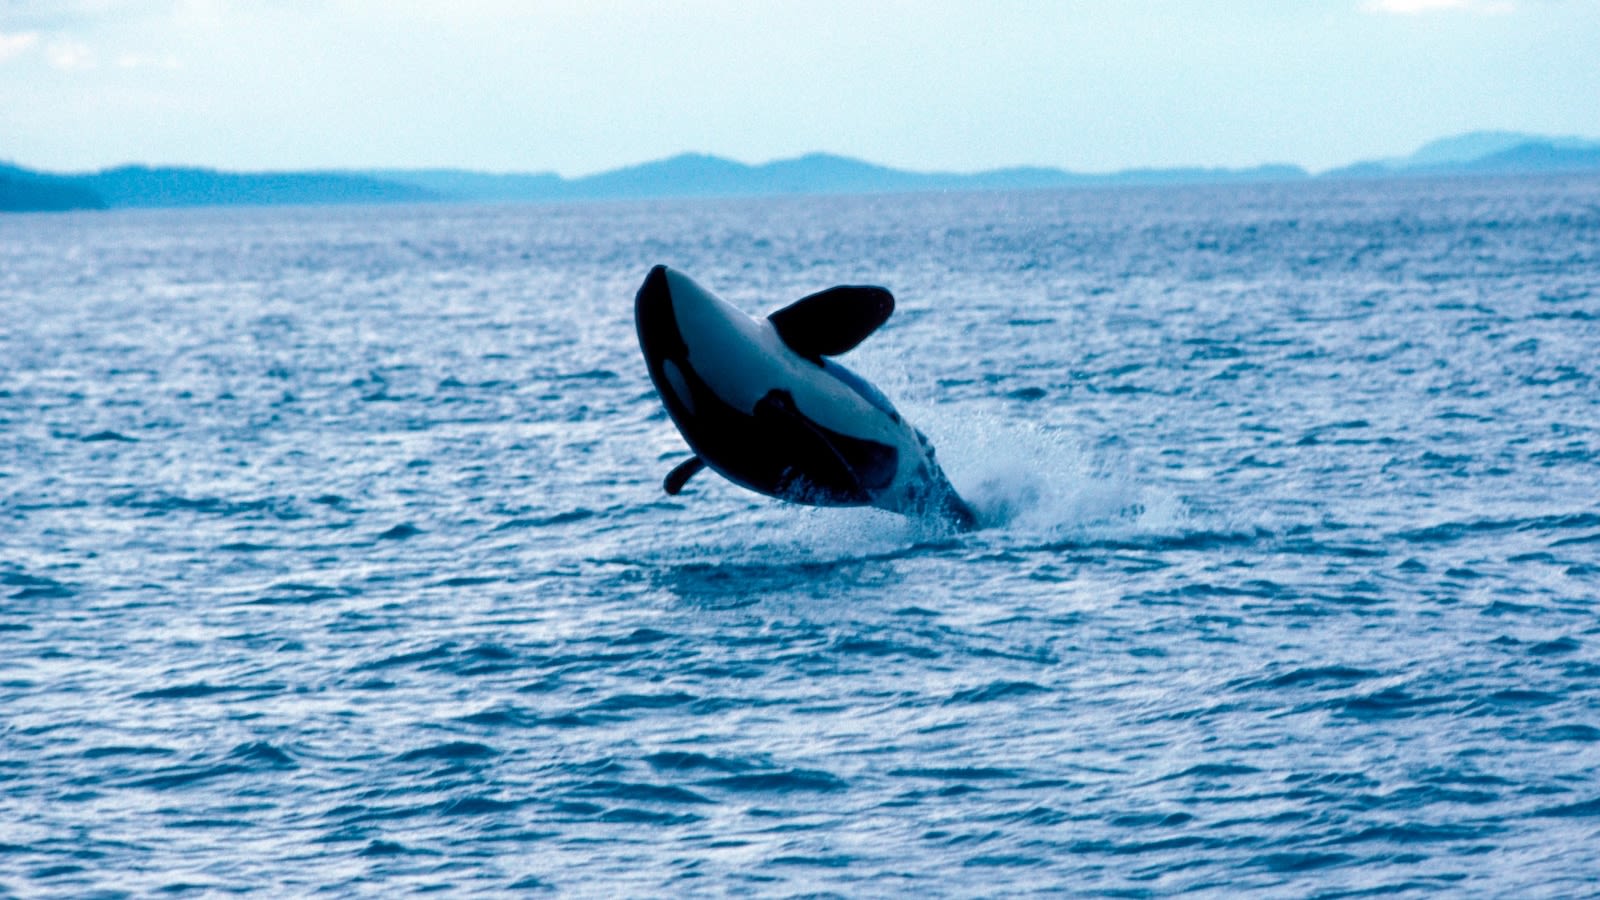 Pod of killer whales attacks and sinks 50-foot yacht in Strait of Gibraltar